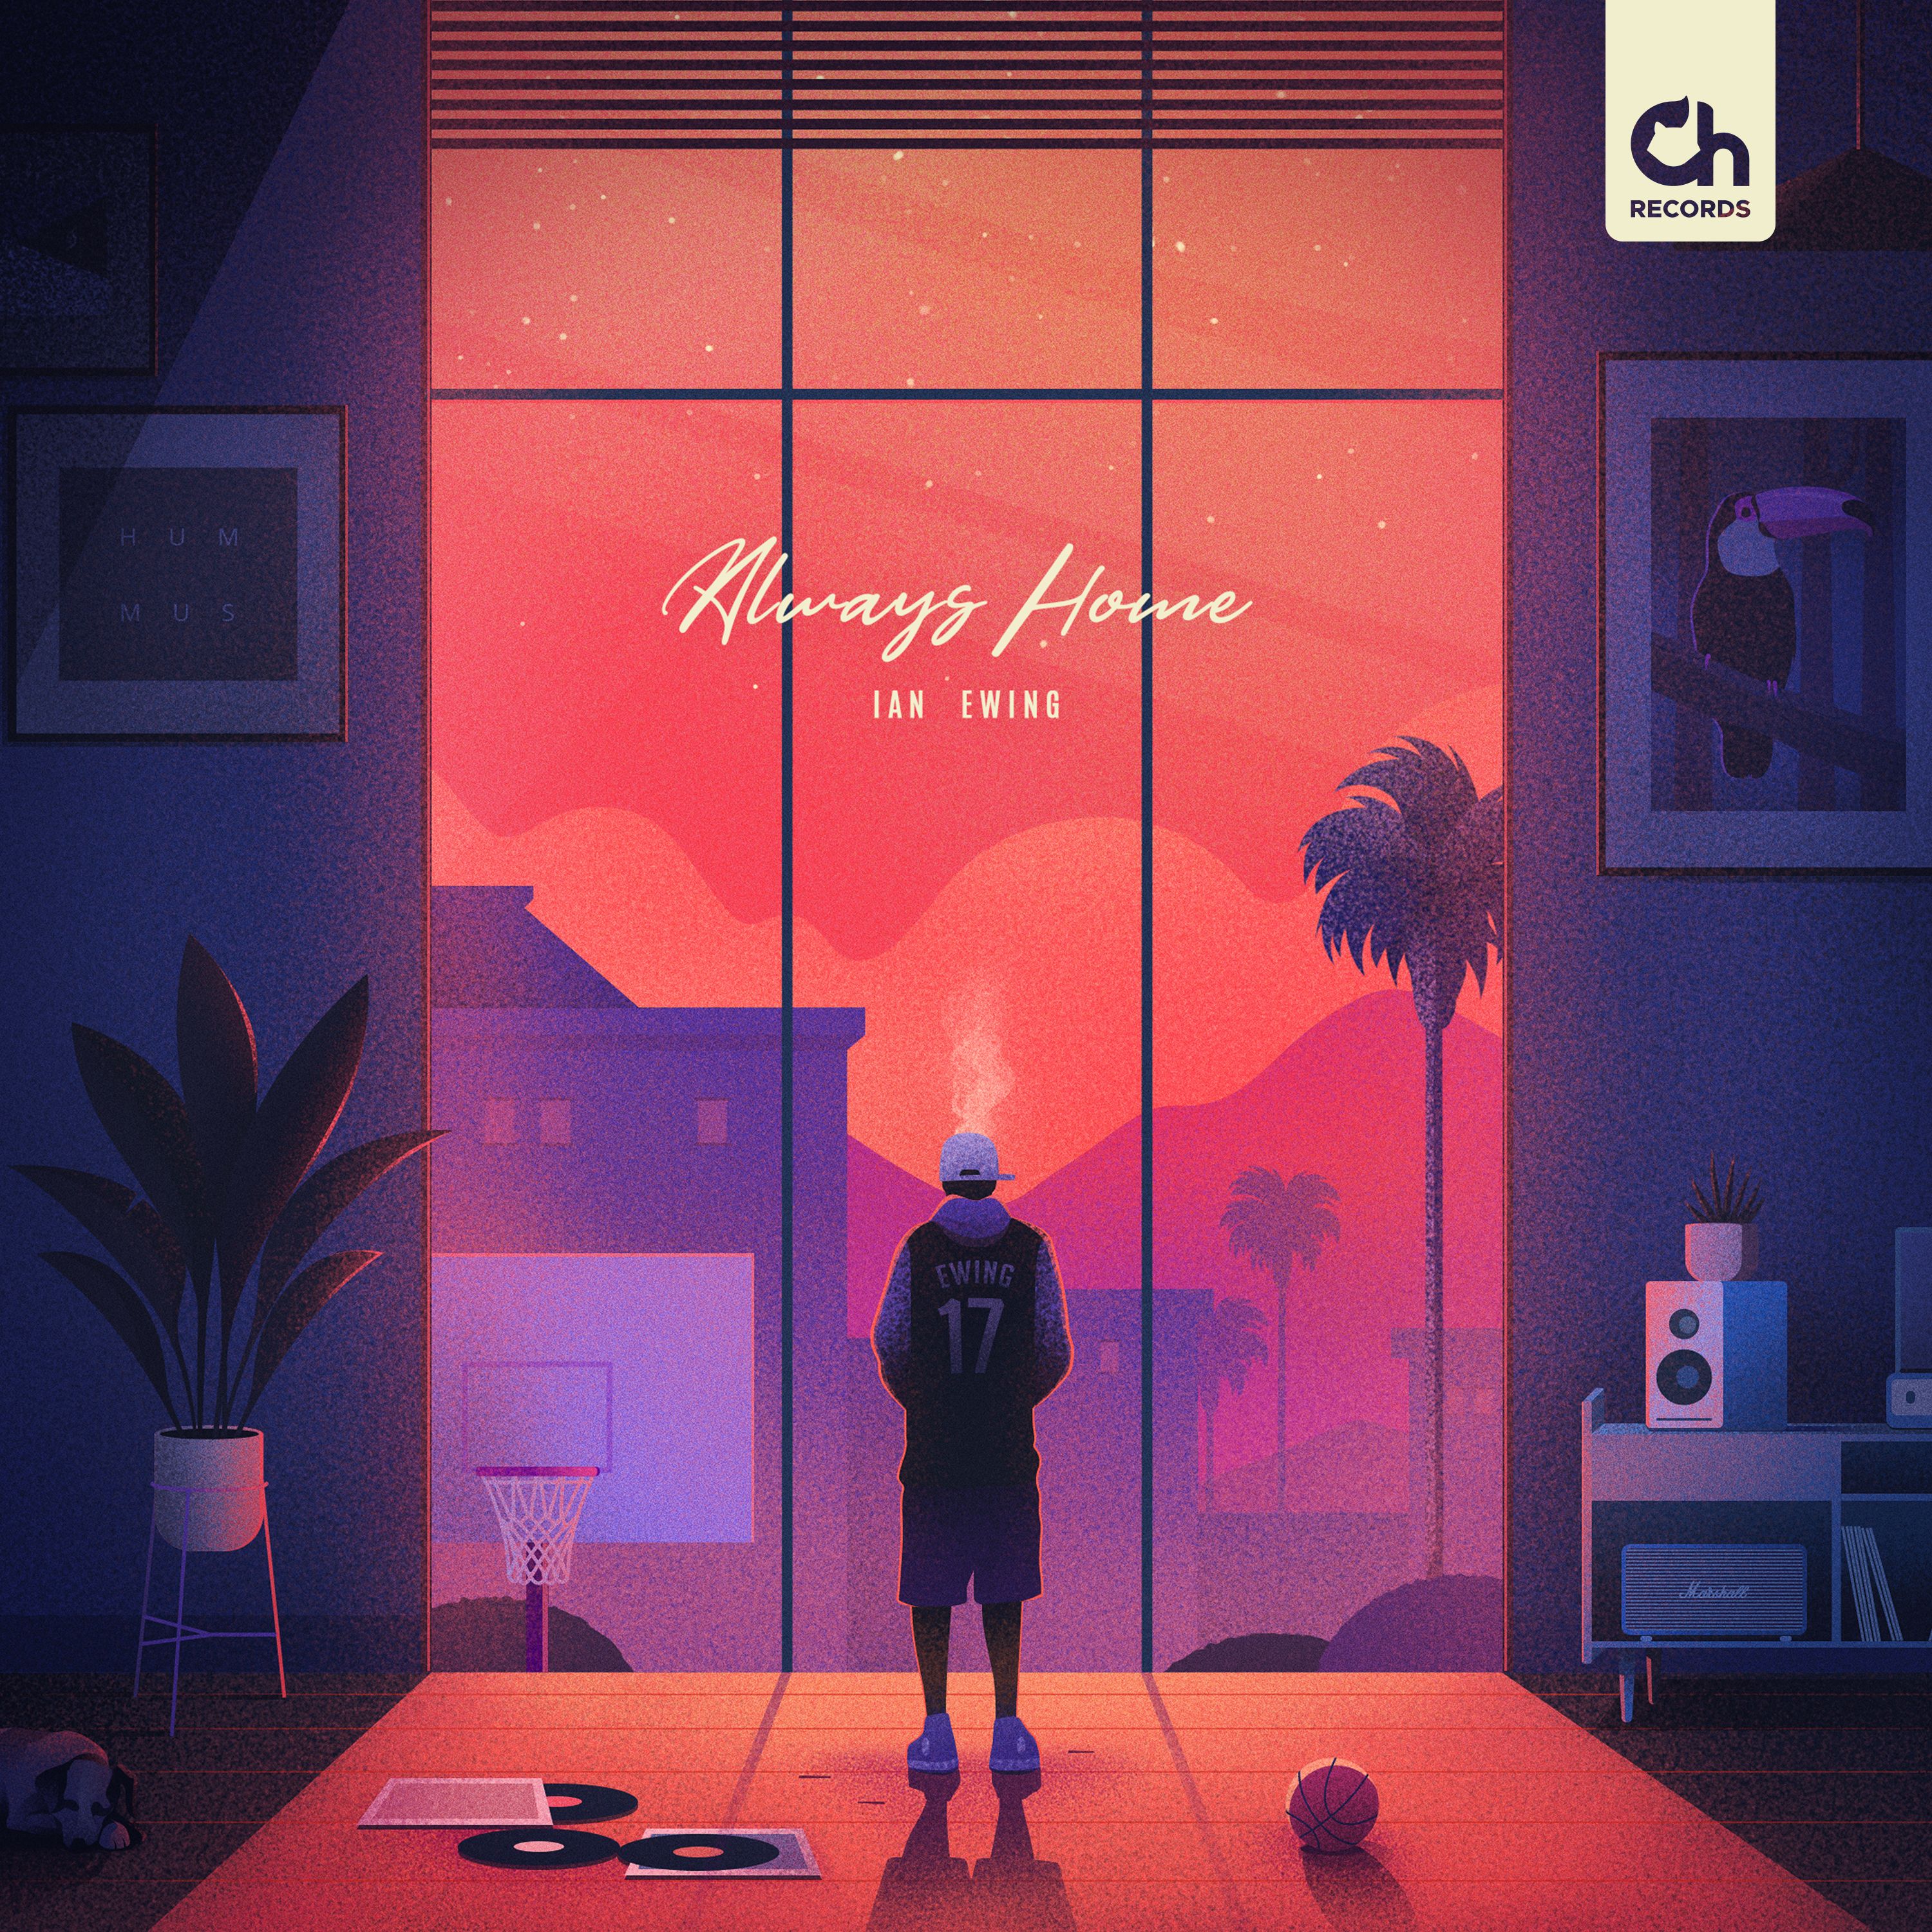 Ladata Ian Ewing - 17 ["Always Home" EP out on 09.09]